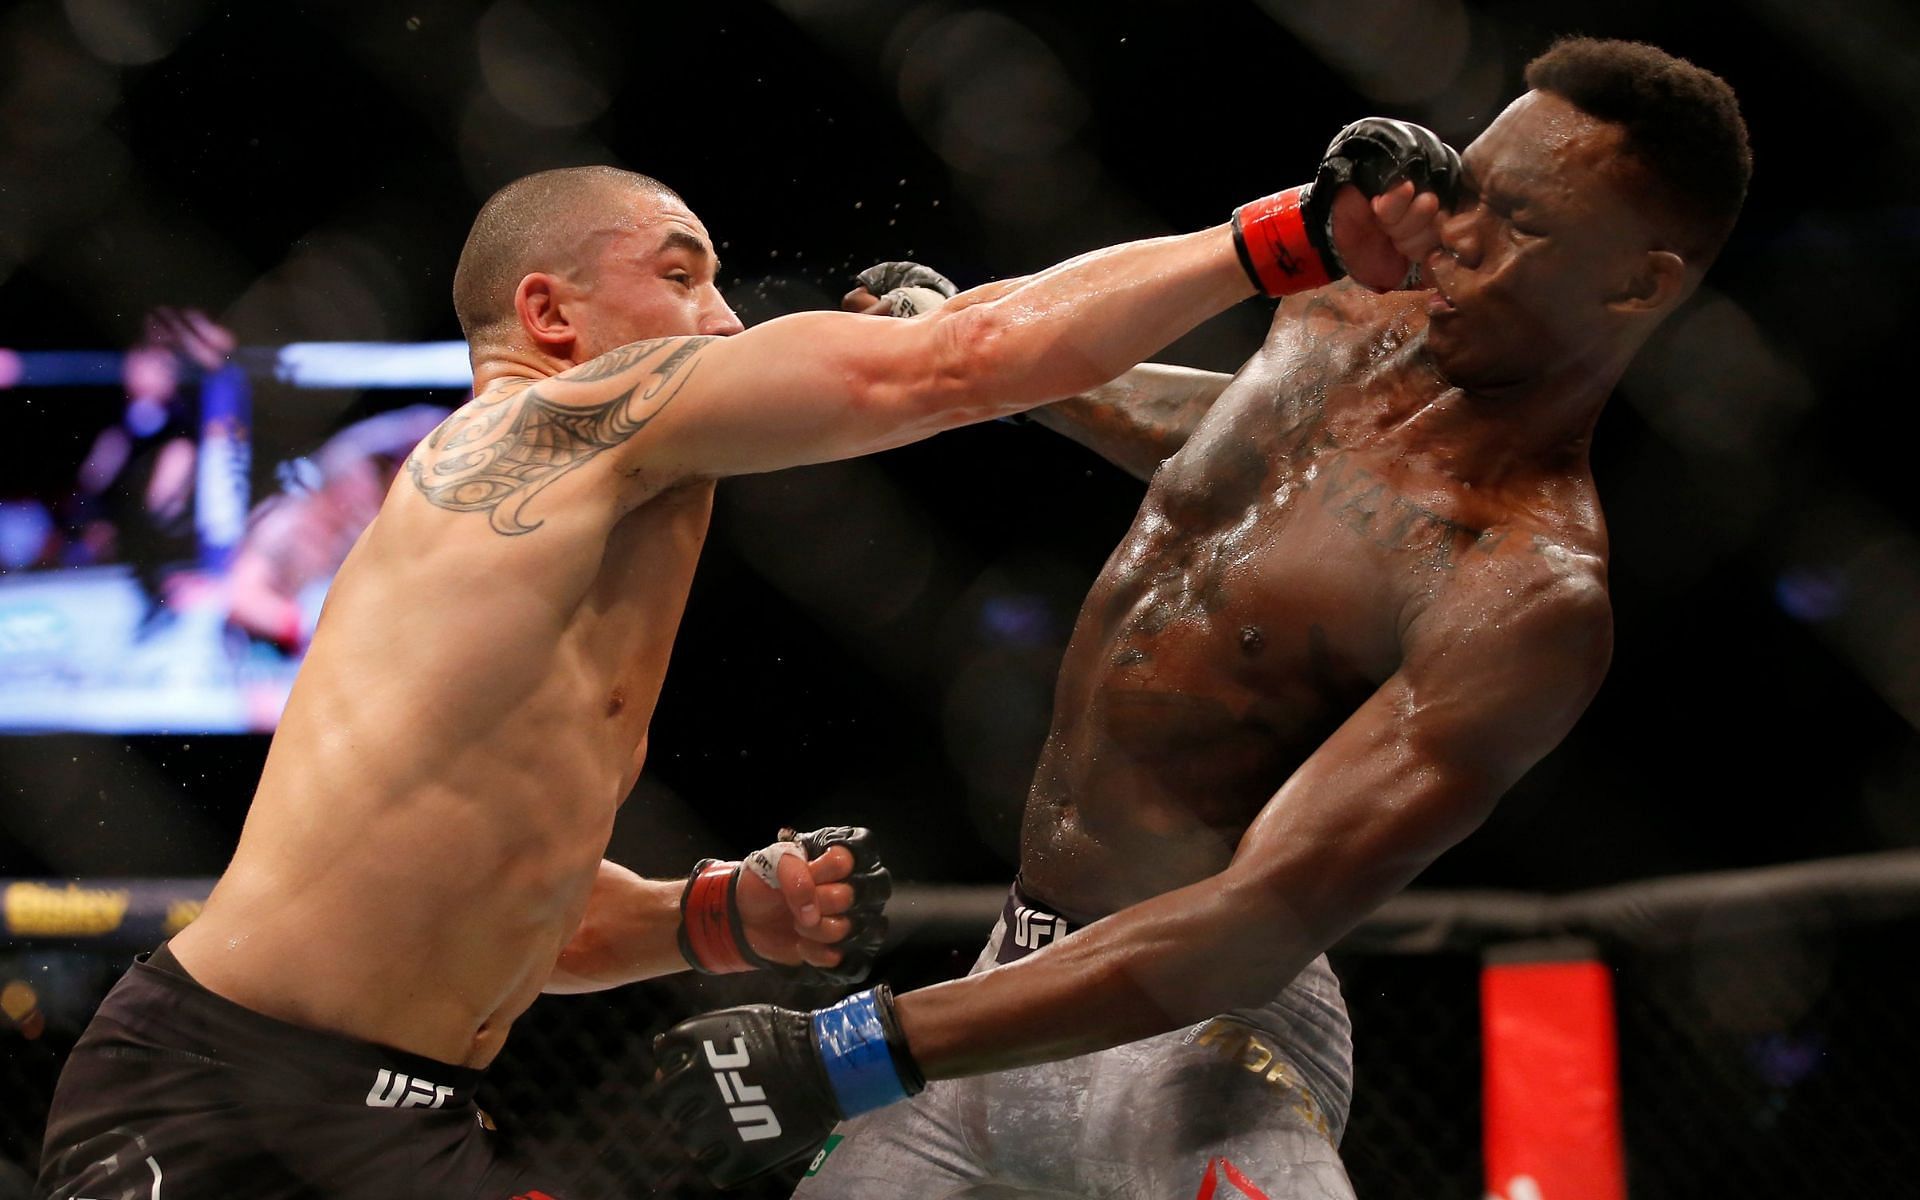 Robert Whittaker (left) in action against Israel Adesanya (right) during their first fight at UFC 243